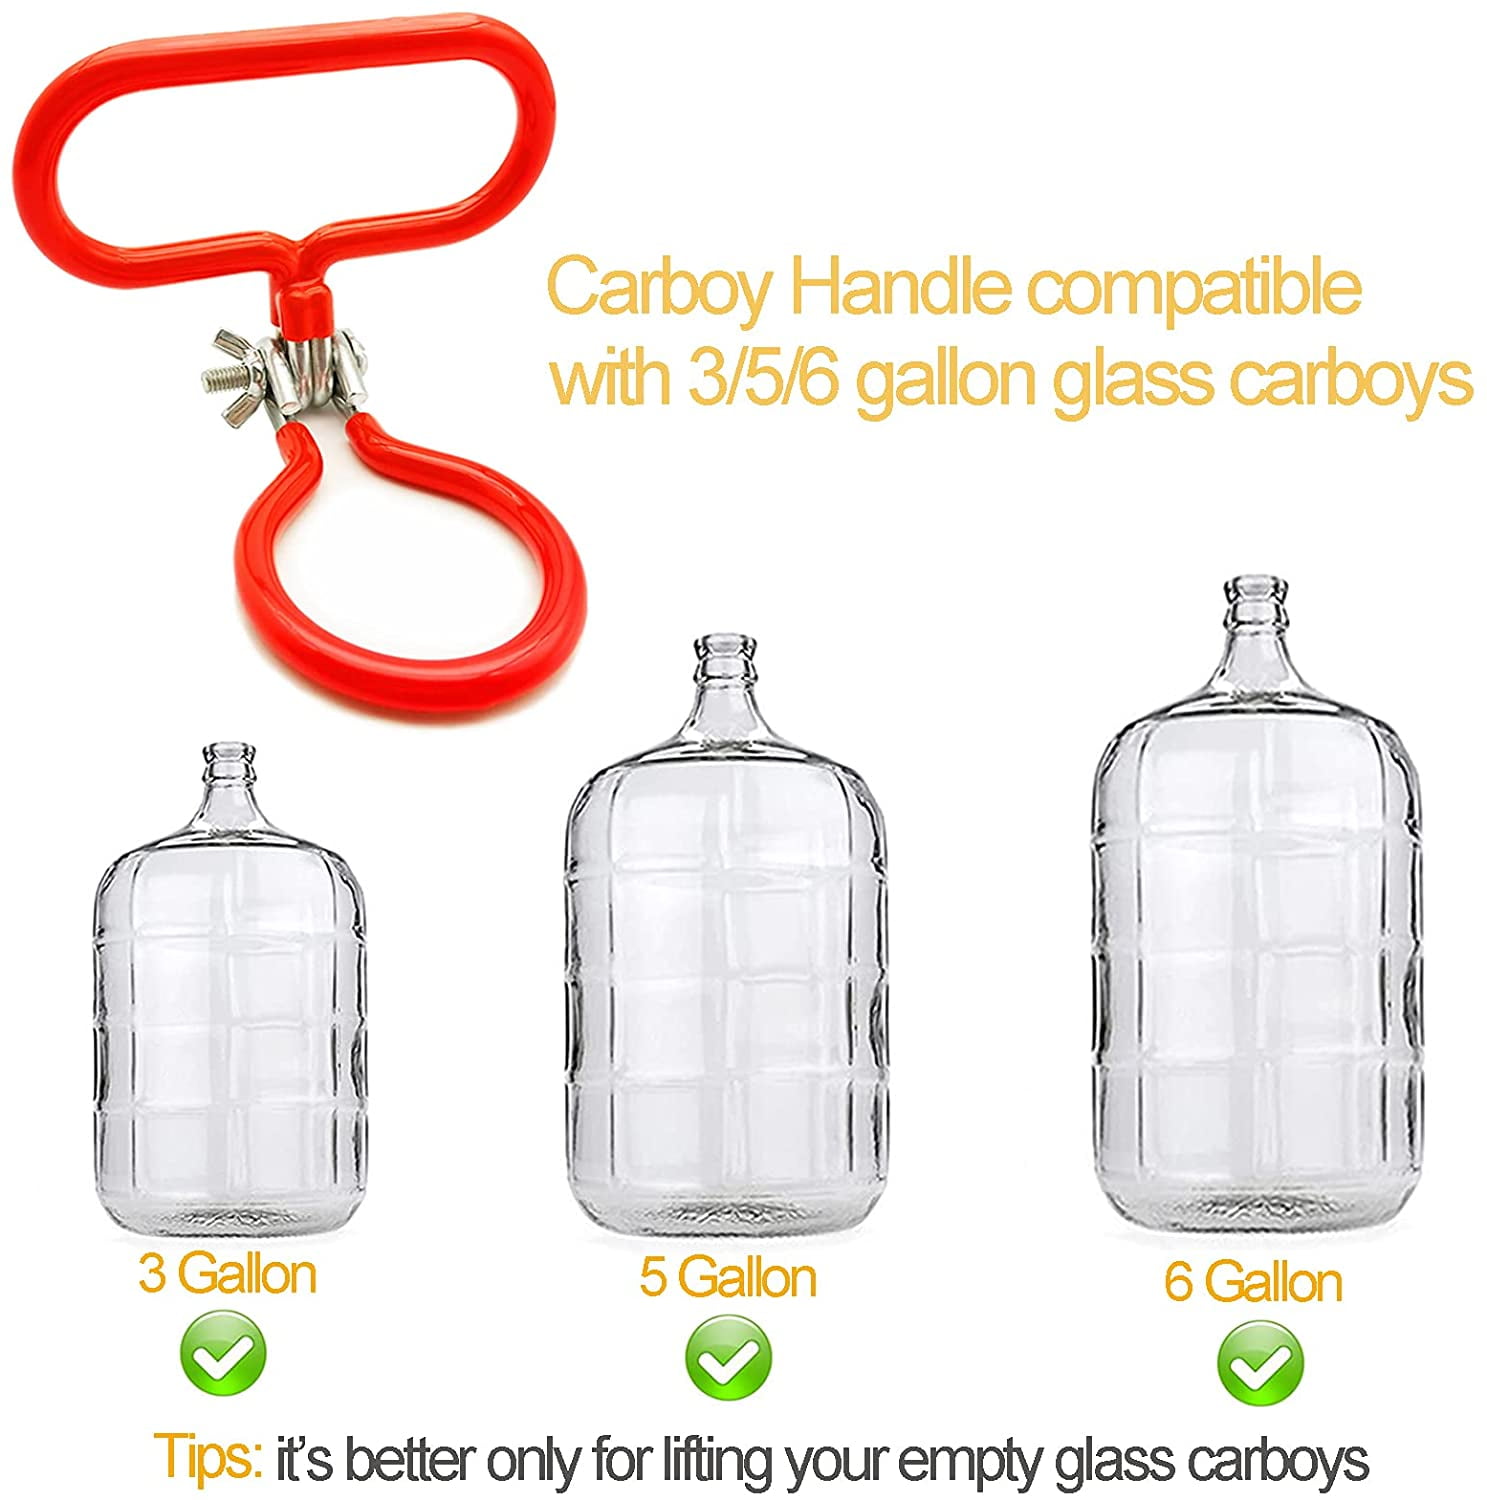 2 Pack Heavy Duty Carboy Handle Carboy Holder Compatible with 3/5/6 Gallon Glass Carboys for Fermenter Wine Making Beer Brewing Home Brewing AIEVE Carboy Handle